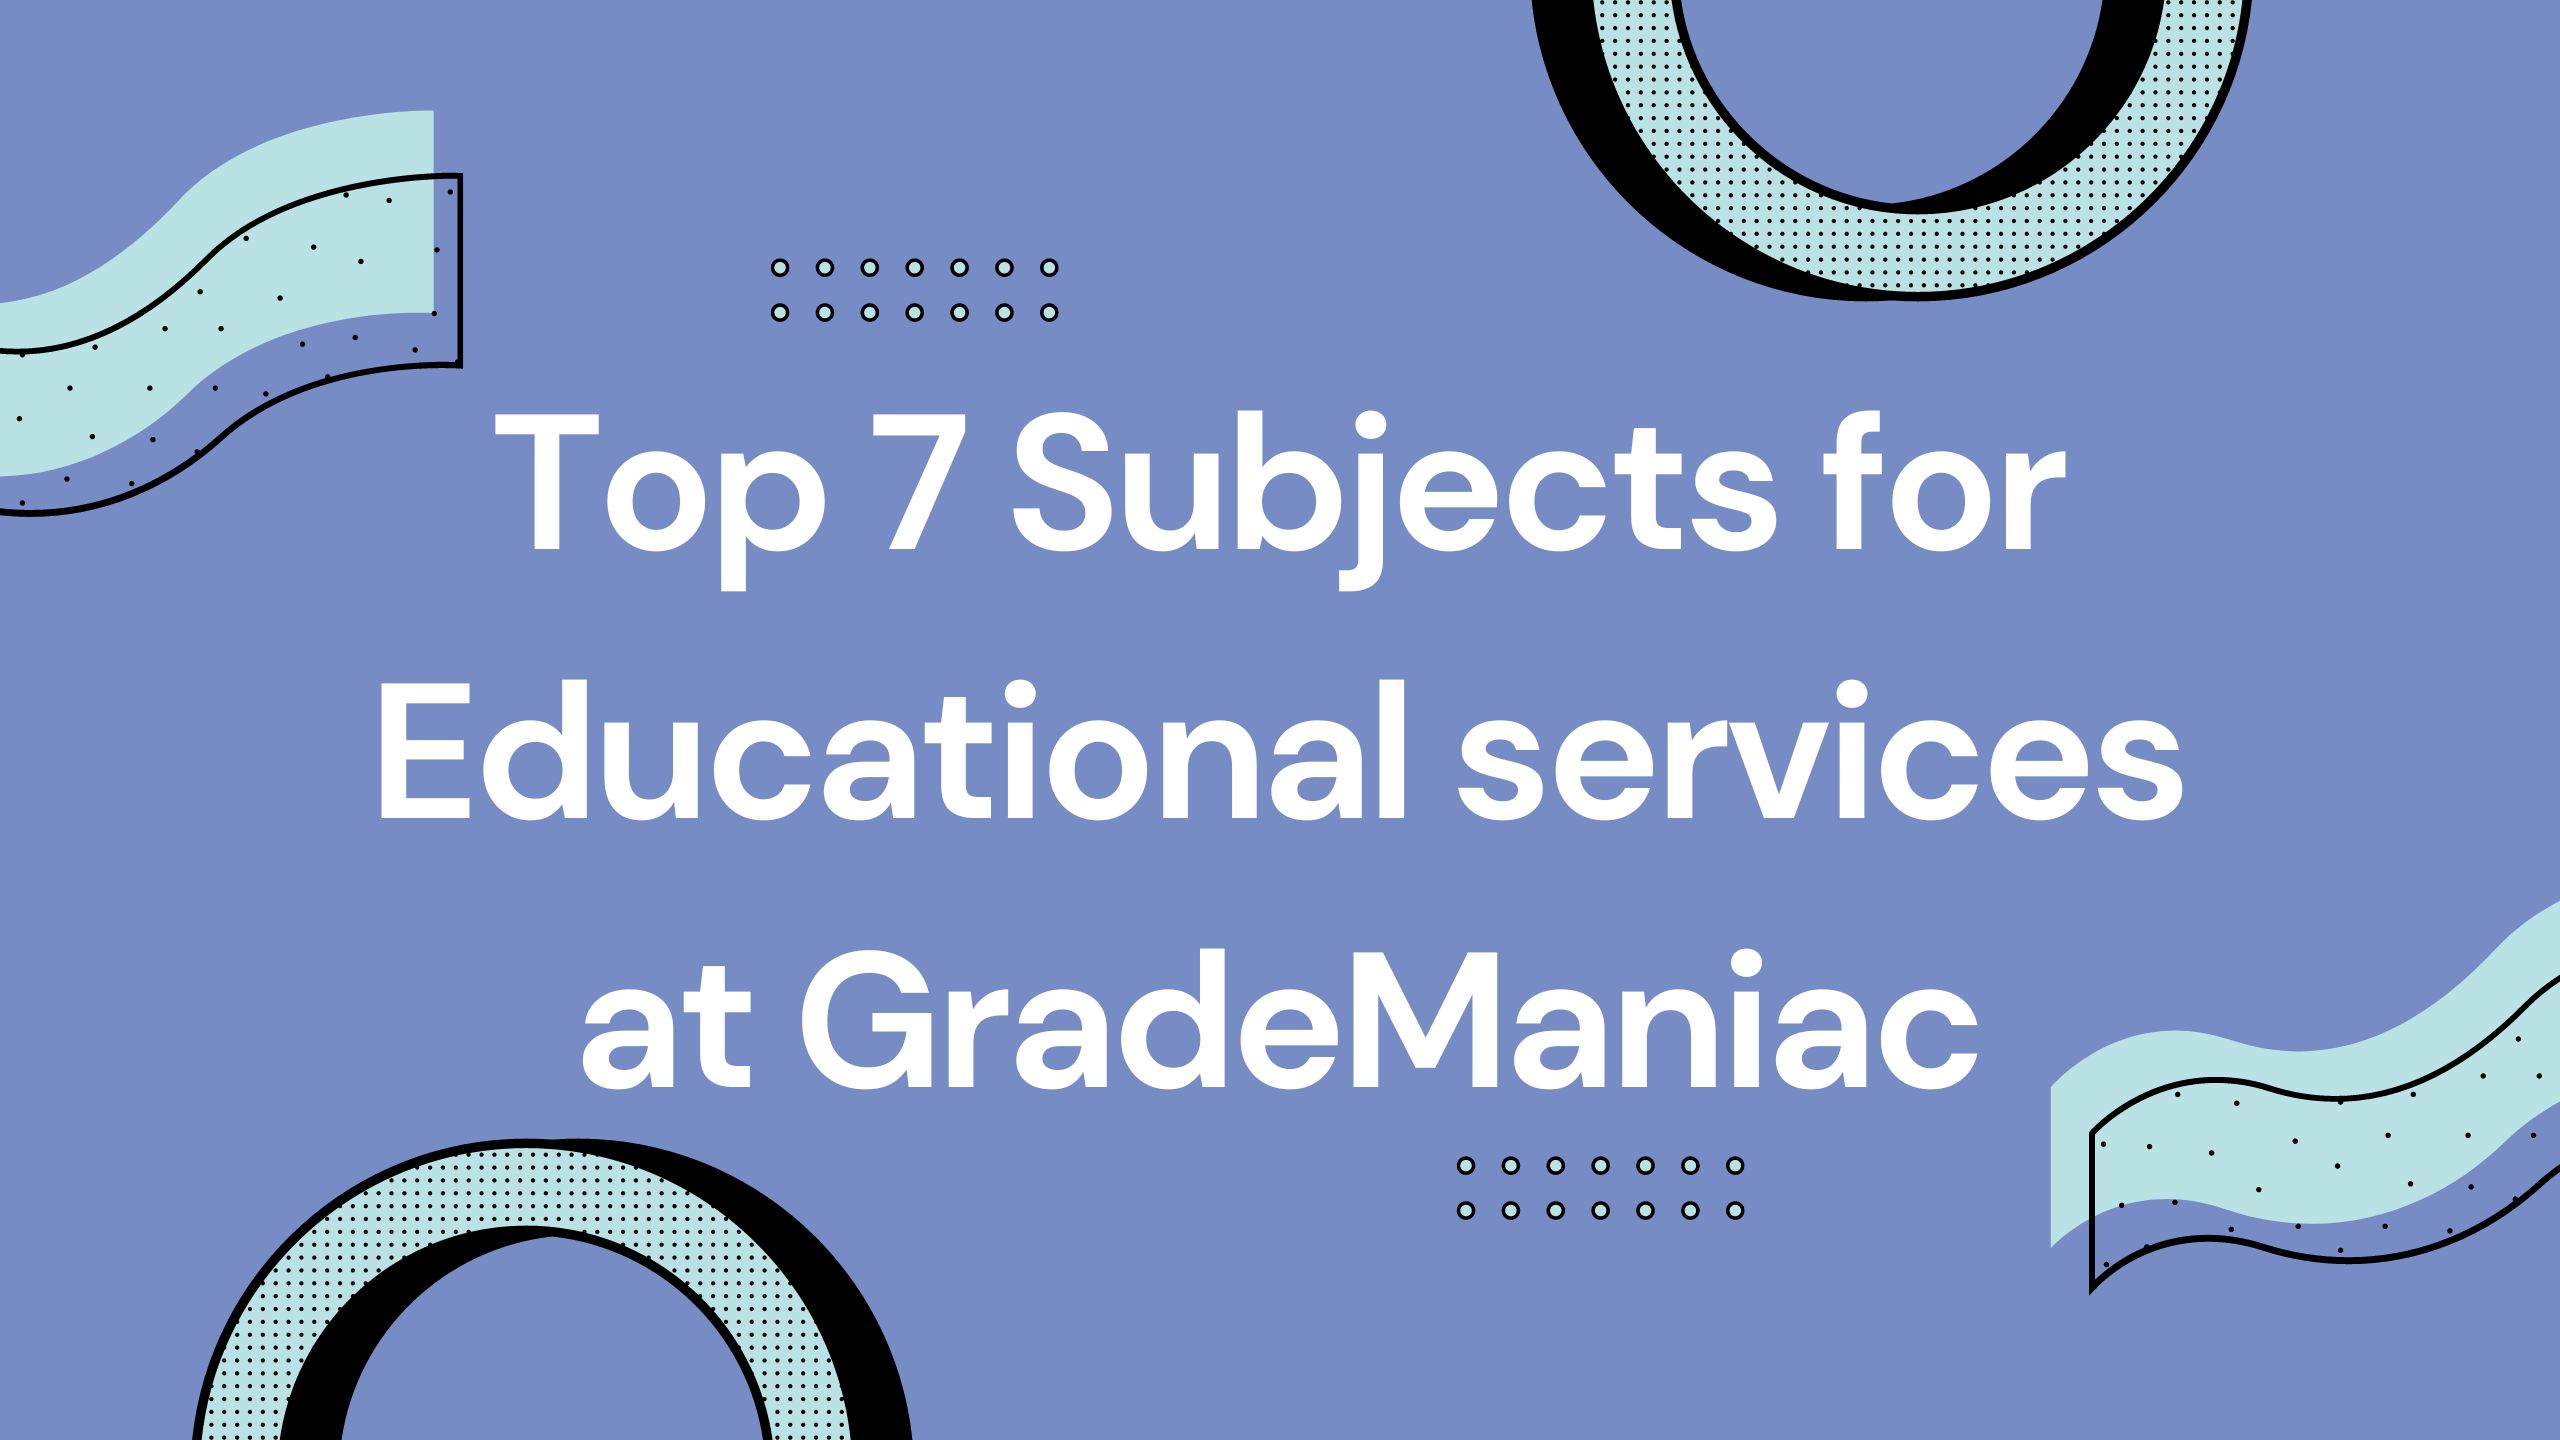 Top 7 Subjects for Educational services at GradeManiac